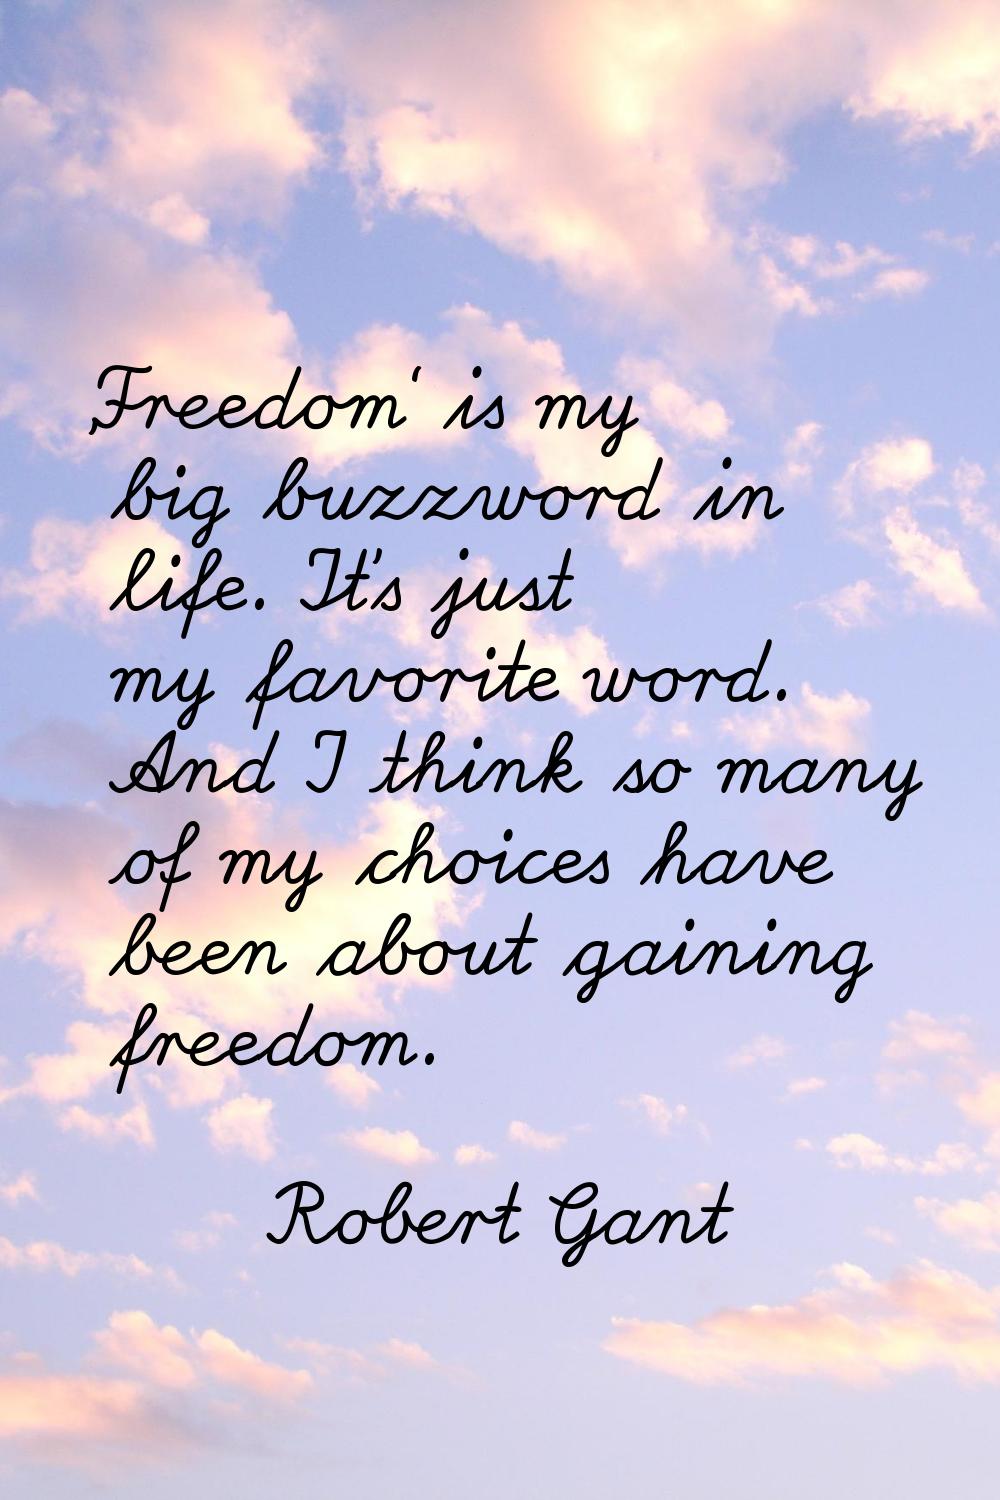 'Freedom' is my big buzzword in life. It's just my favorite word. And I think so many of my choices